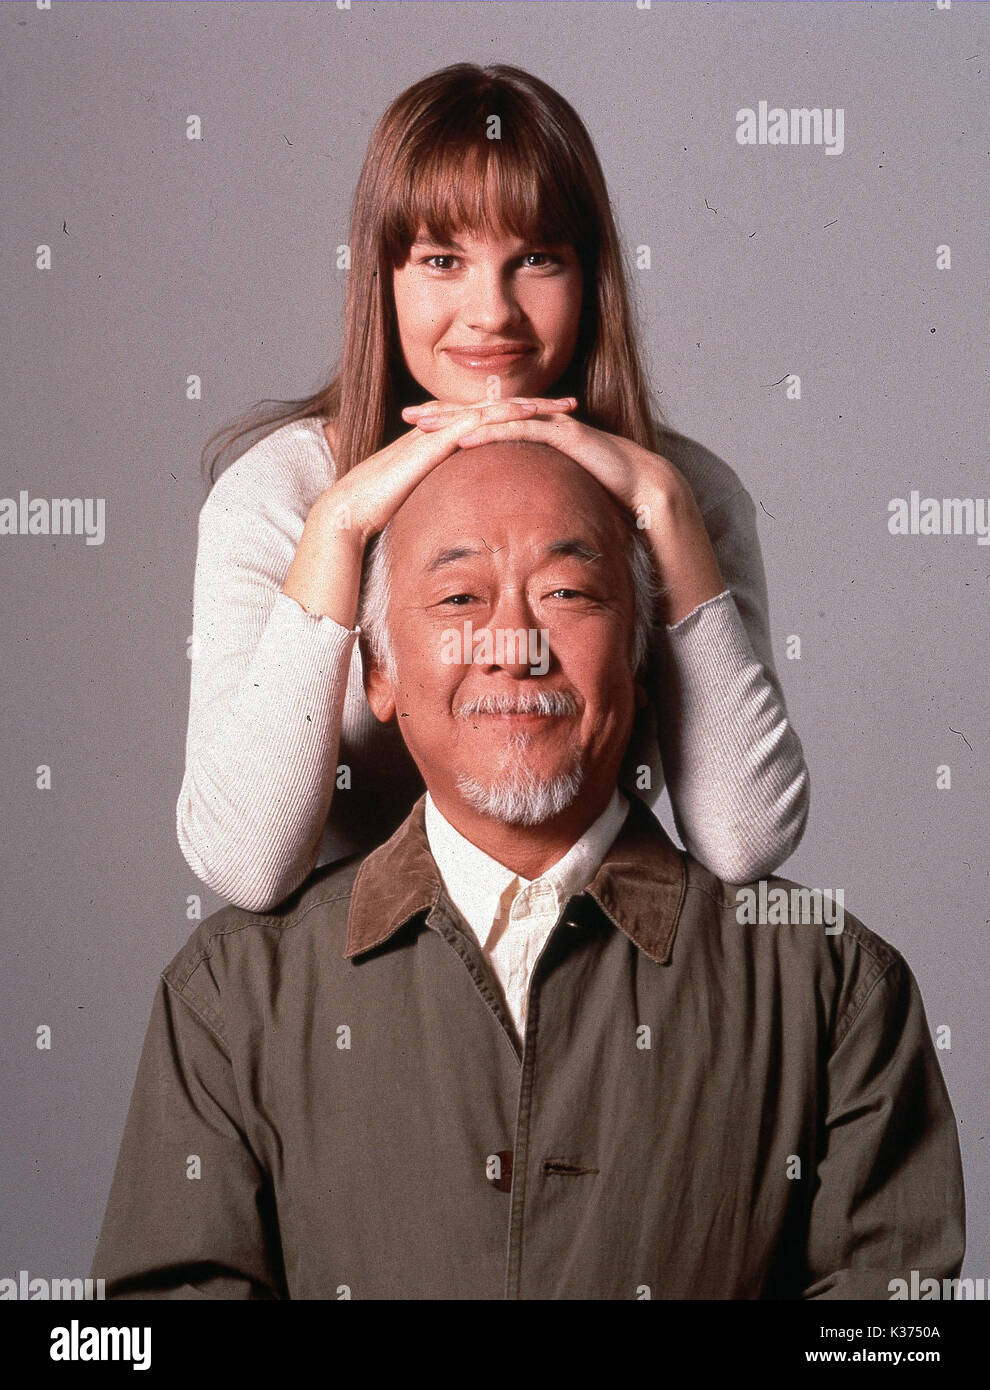 THE NEXT KARATE KID HILARY SWANK AND PAT MORITA   A COLUMBIA PICTURE     Date: 1994 Stock Photo